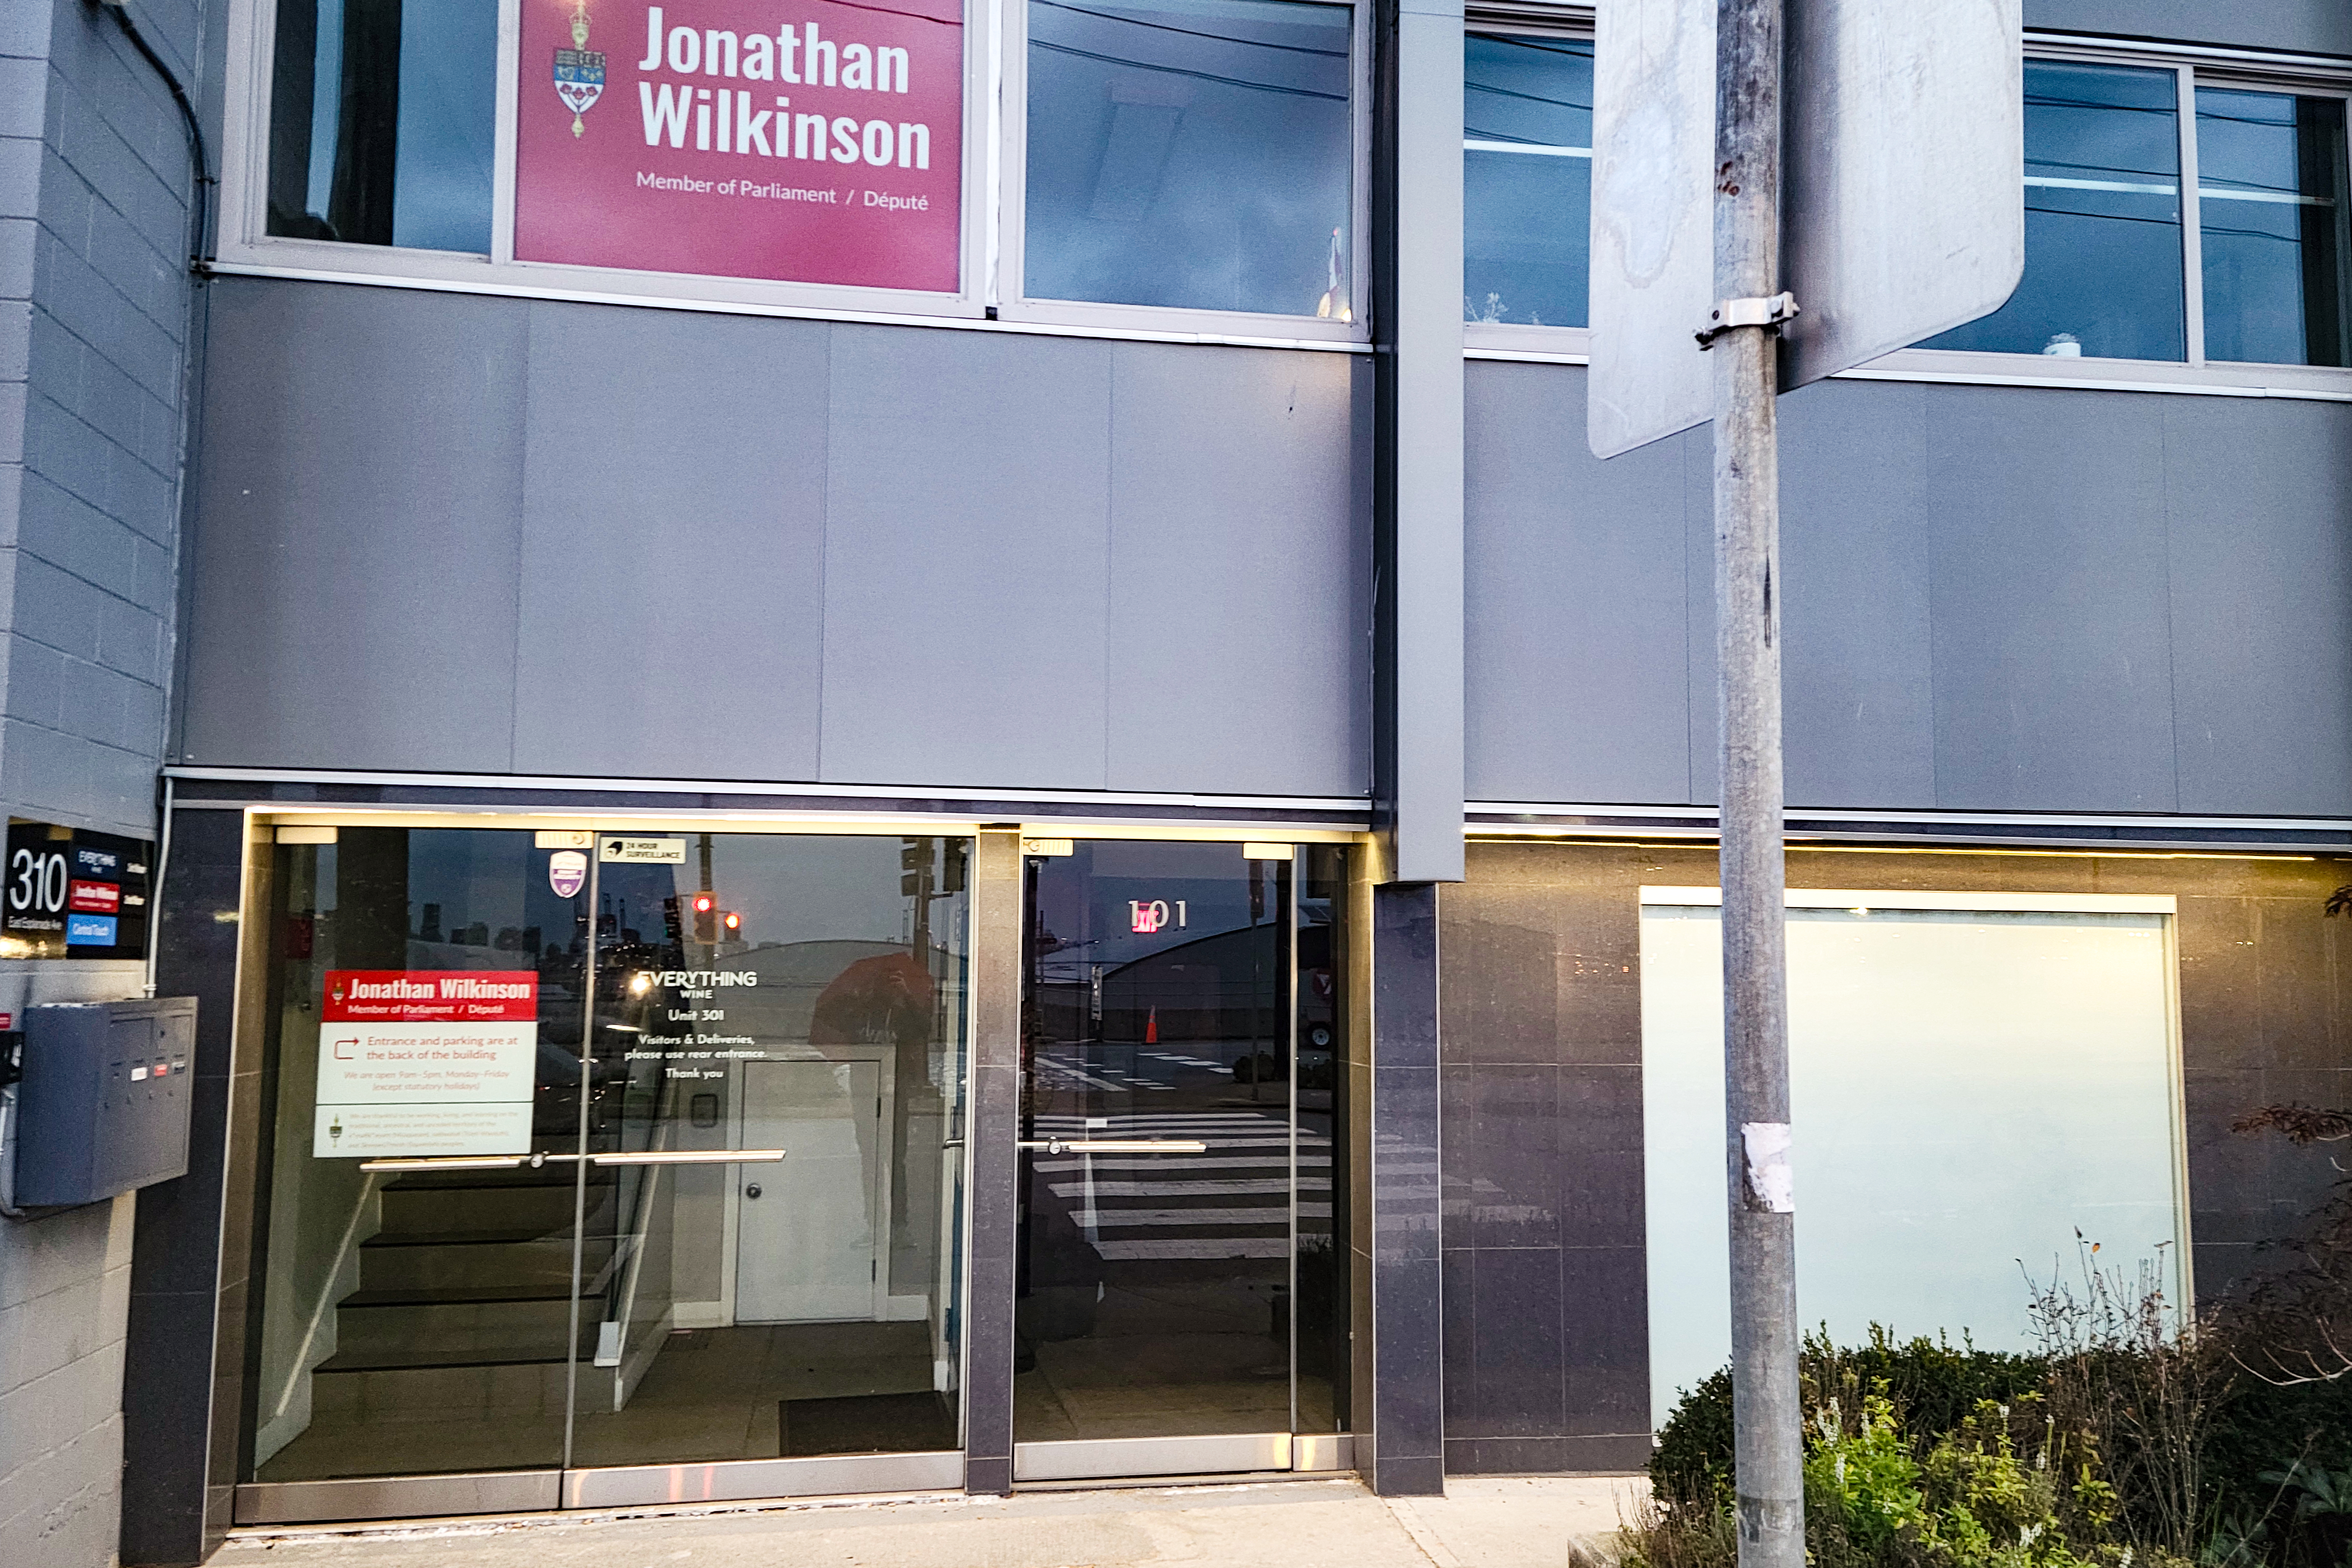 This is a photo of the outside of the minister of energy and natural resources office. His name, Jonathan Wilkinson, is written on the outside of the building